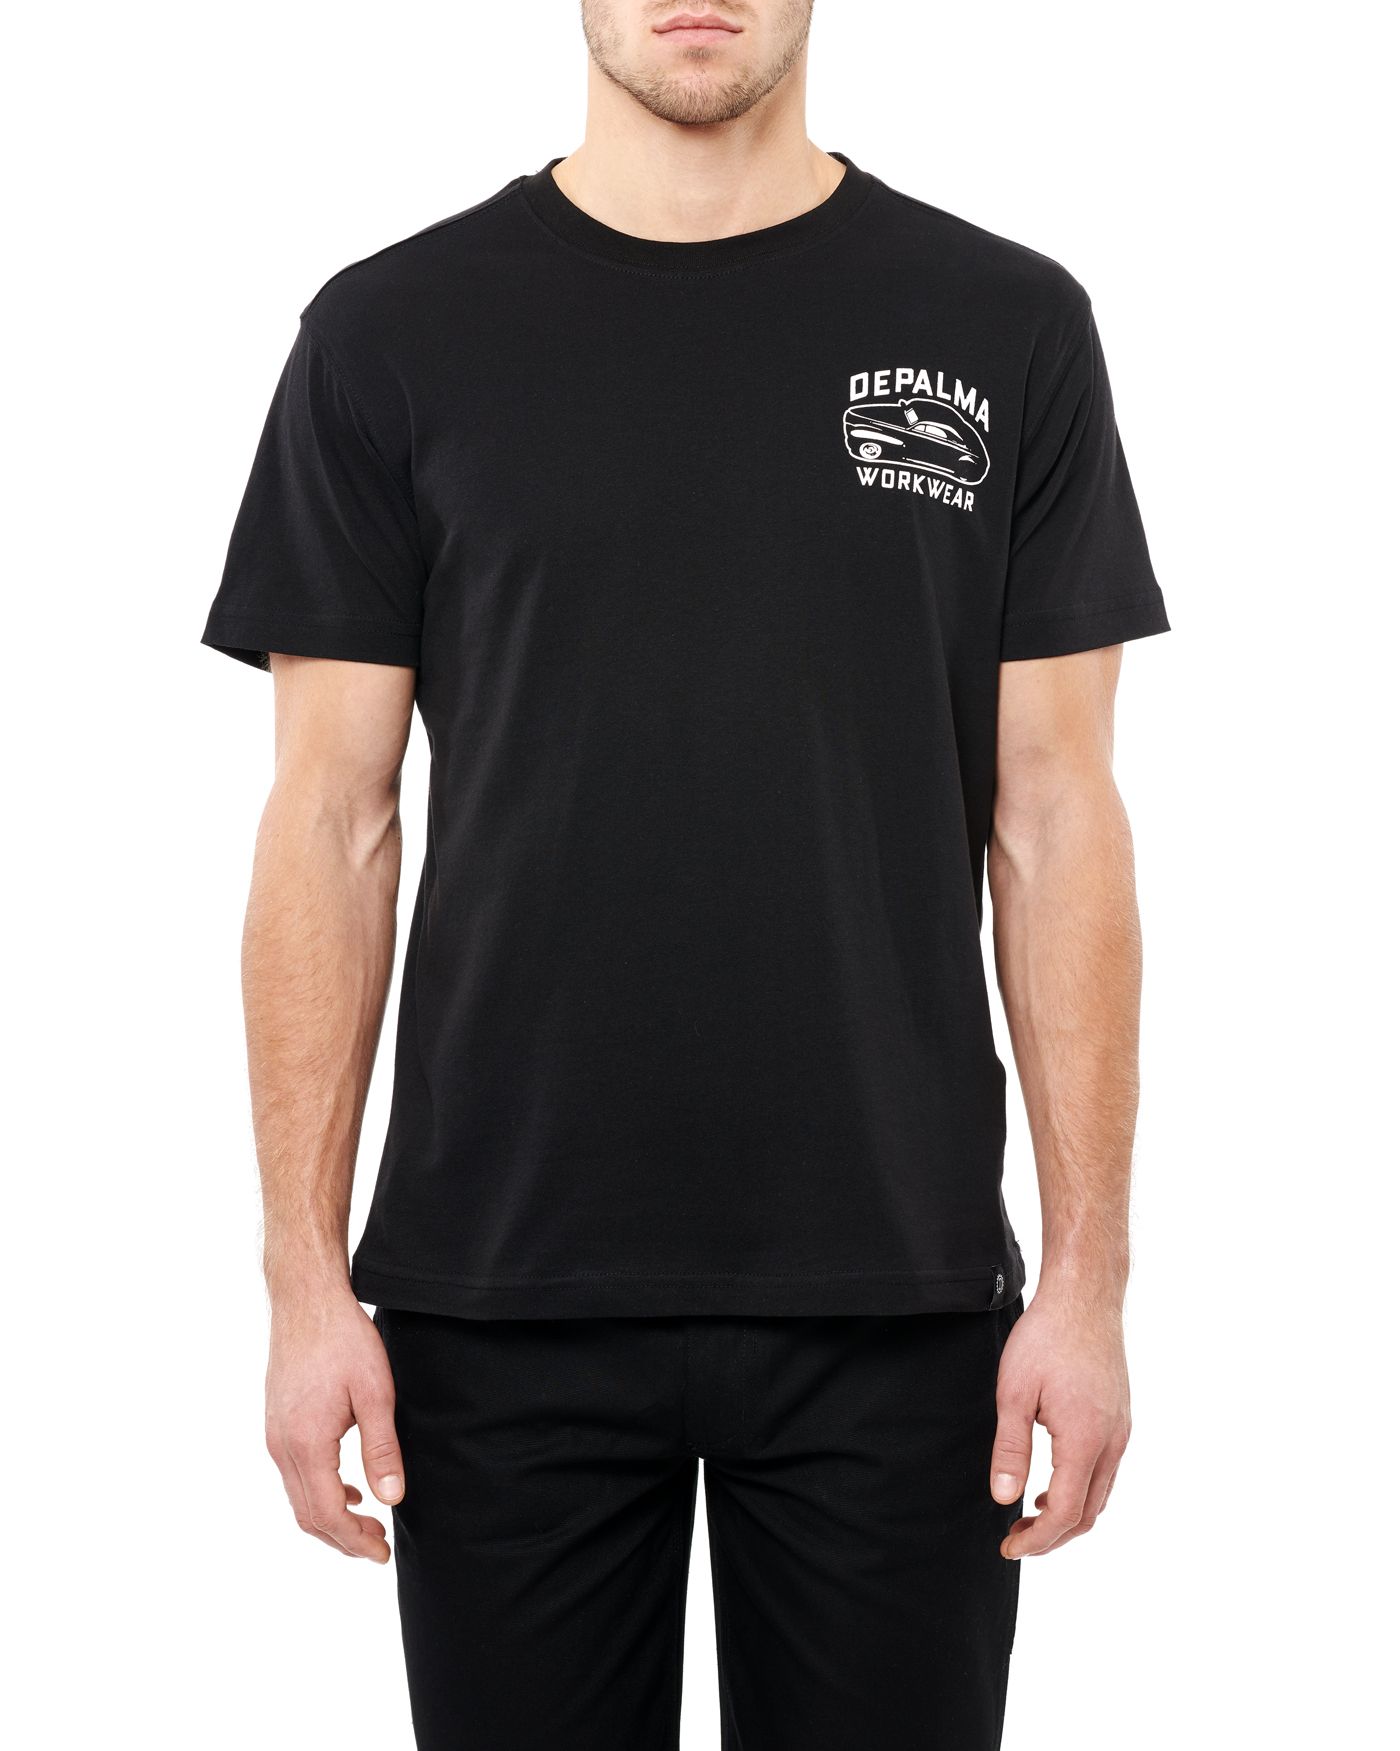 Photo of Outlaw Pete S/S T-shirt, Black